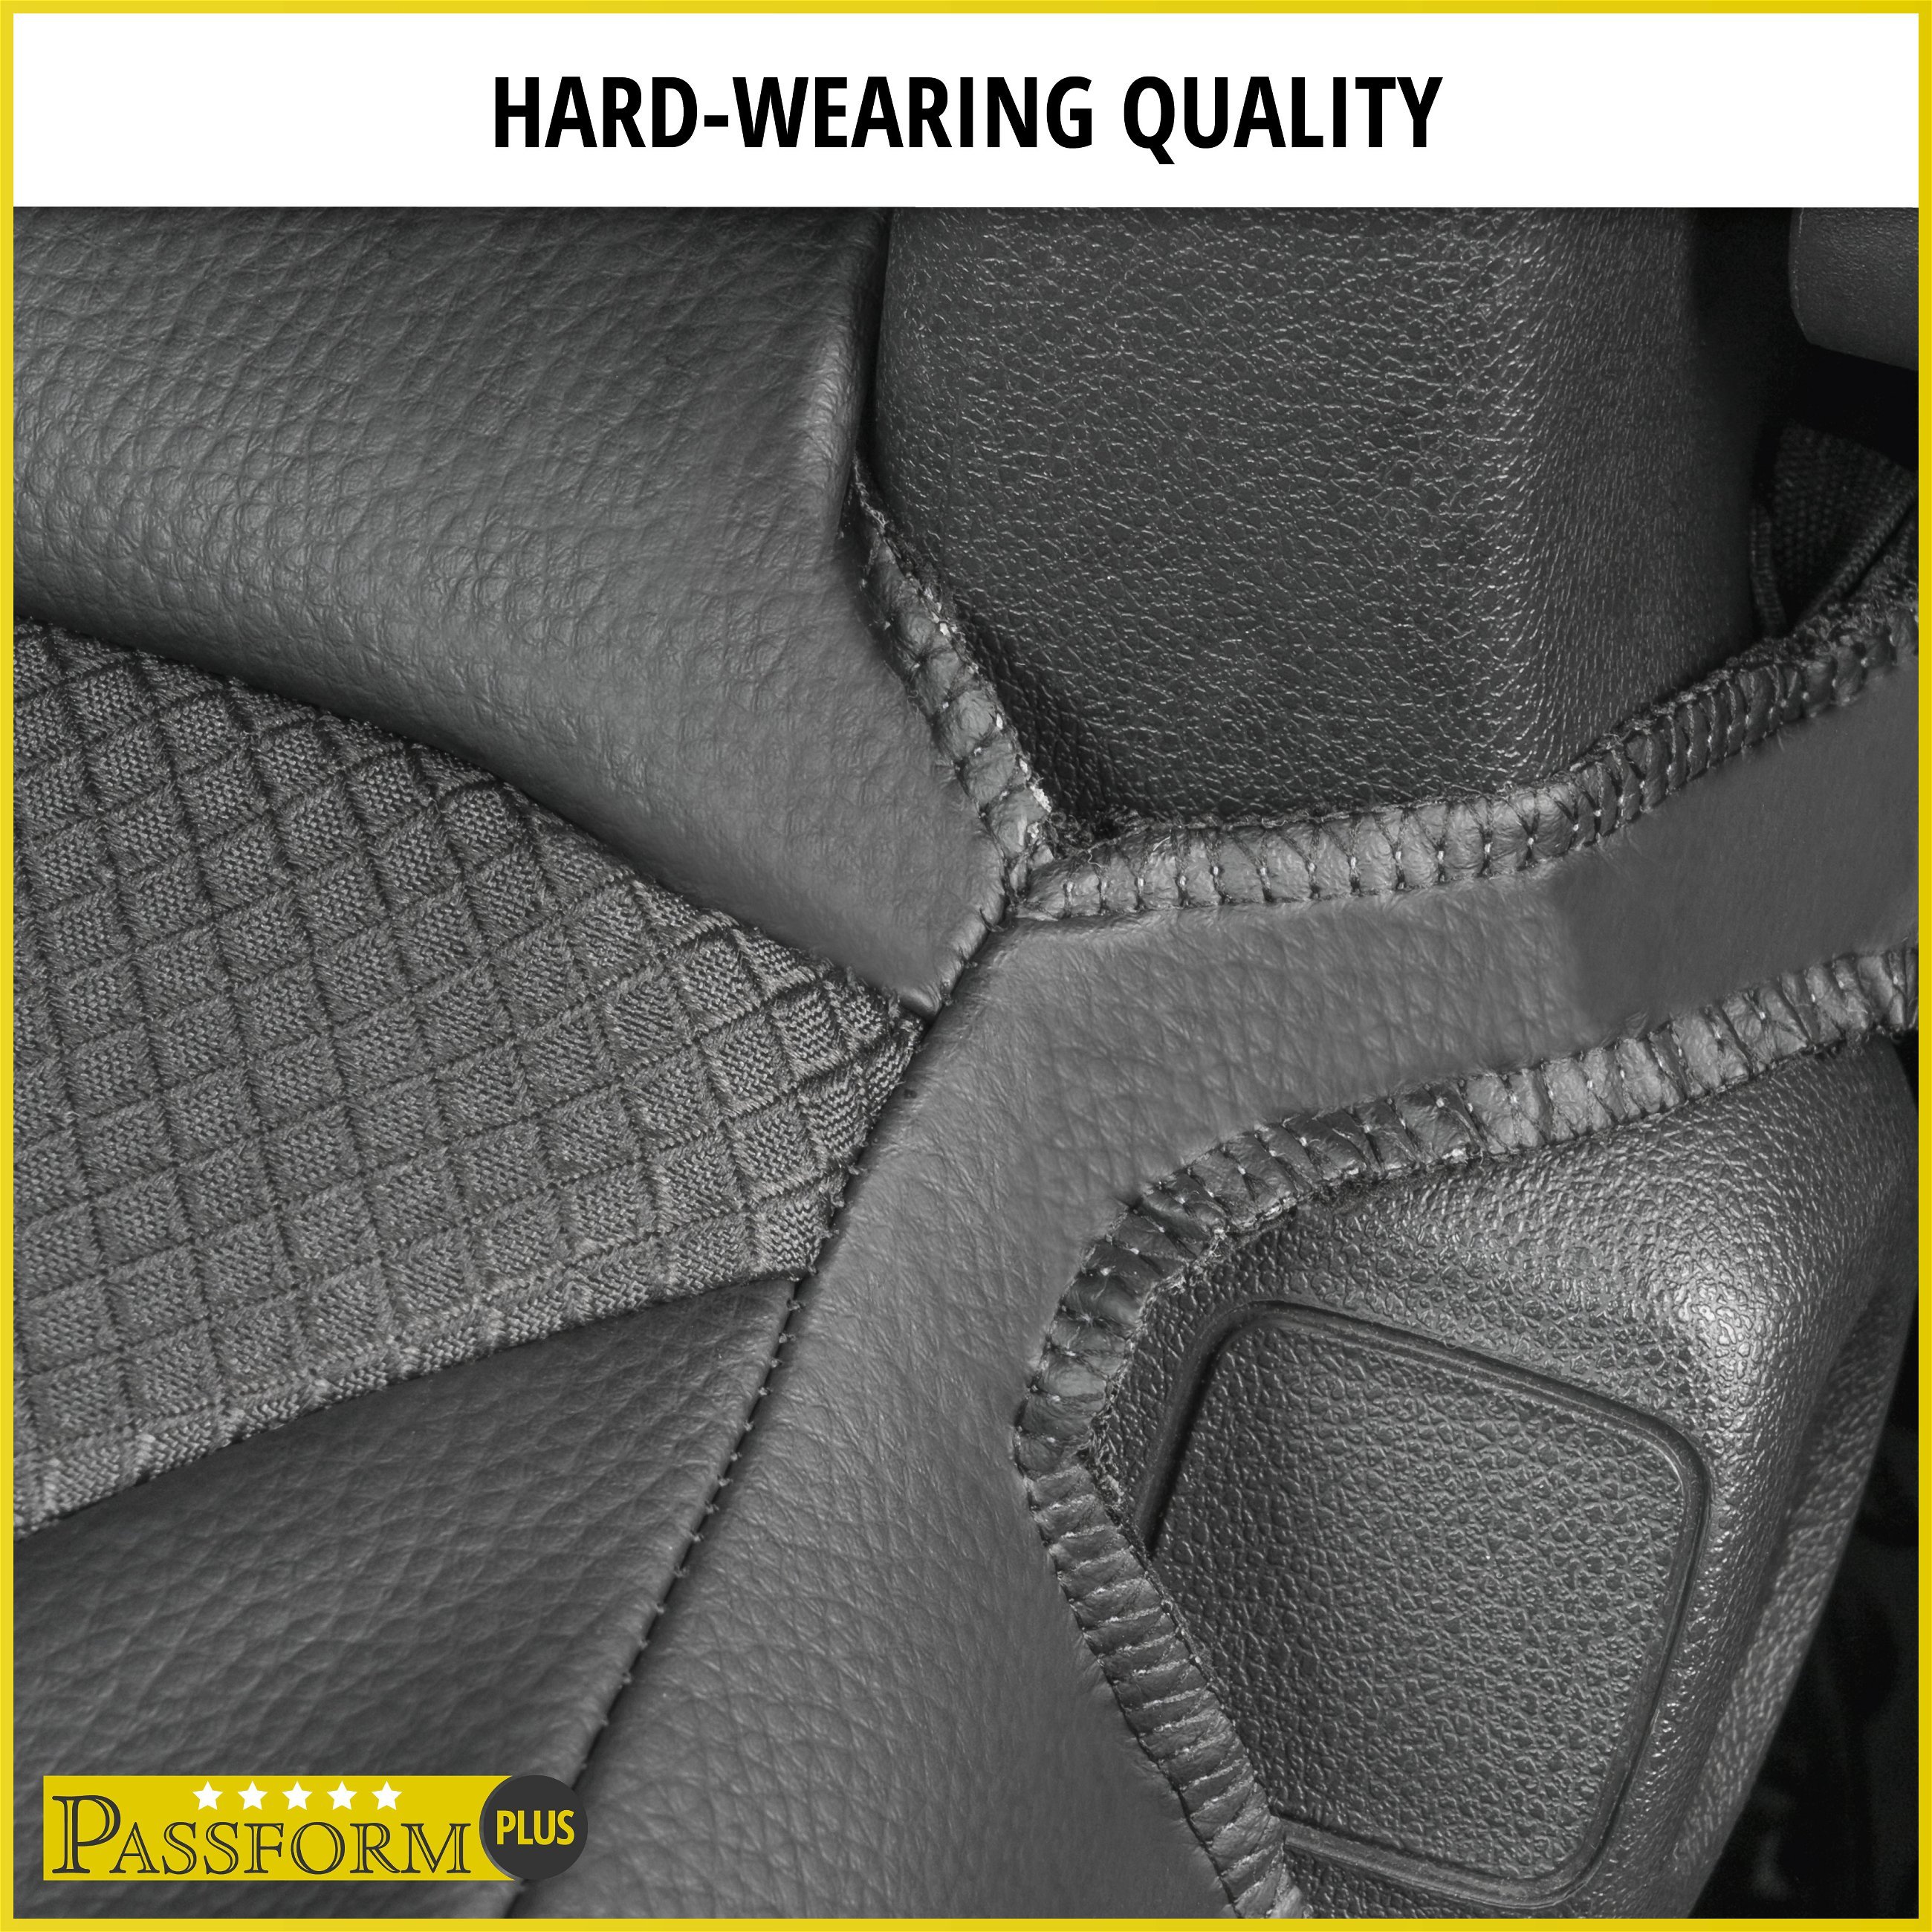 Premium Seat Cover for VW Crafter 2016-Today, 1 single seat cover front + armrest cover, 1 double bench cover